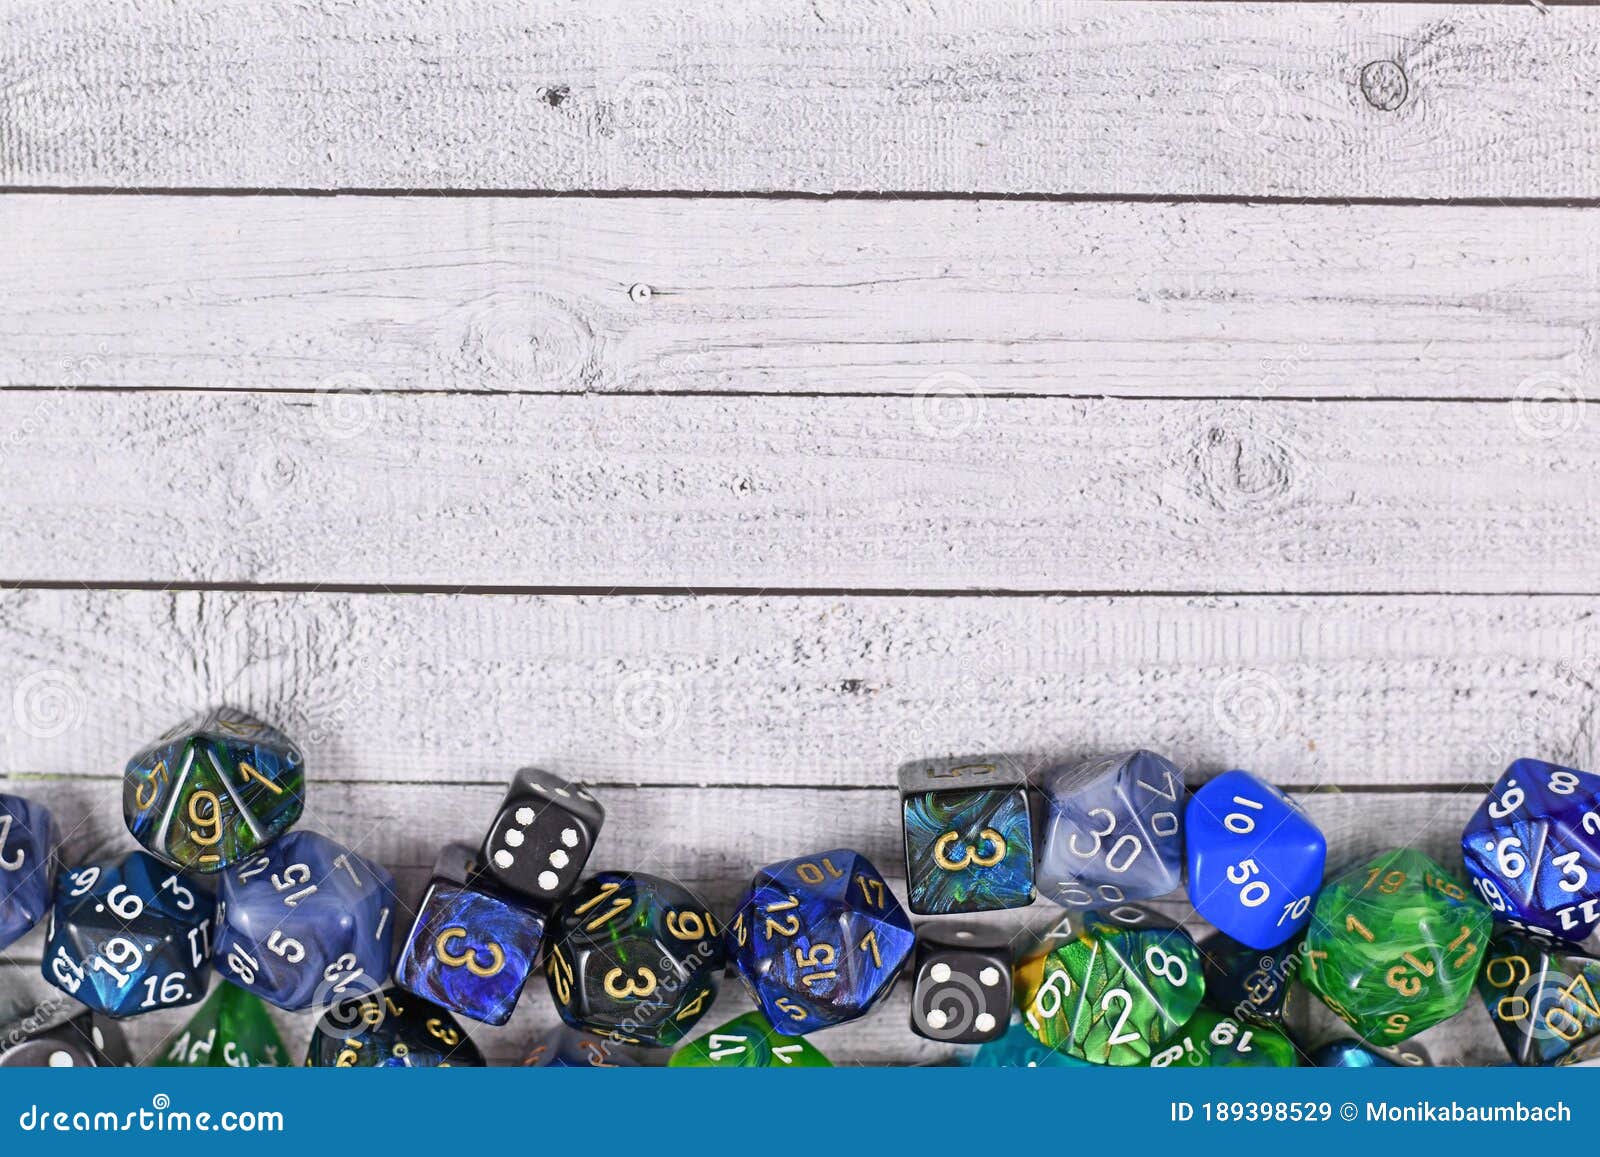 roleplay game background with different blue and green rpg dices at bottom of wooden table background with copy space